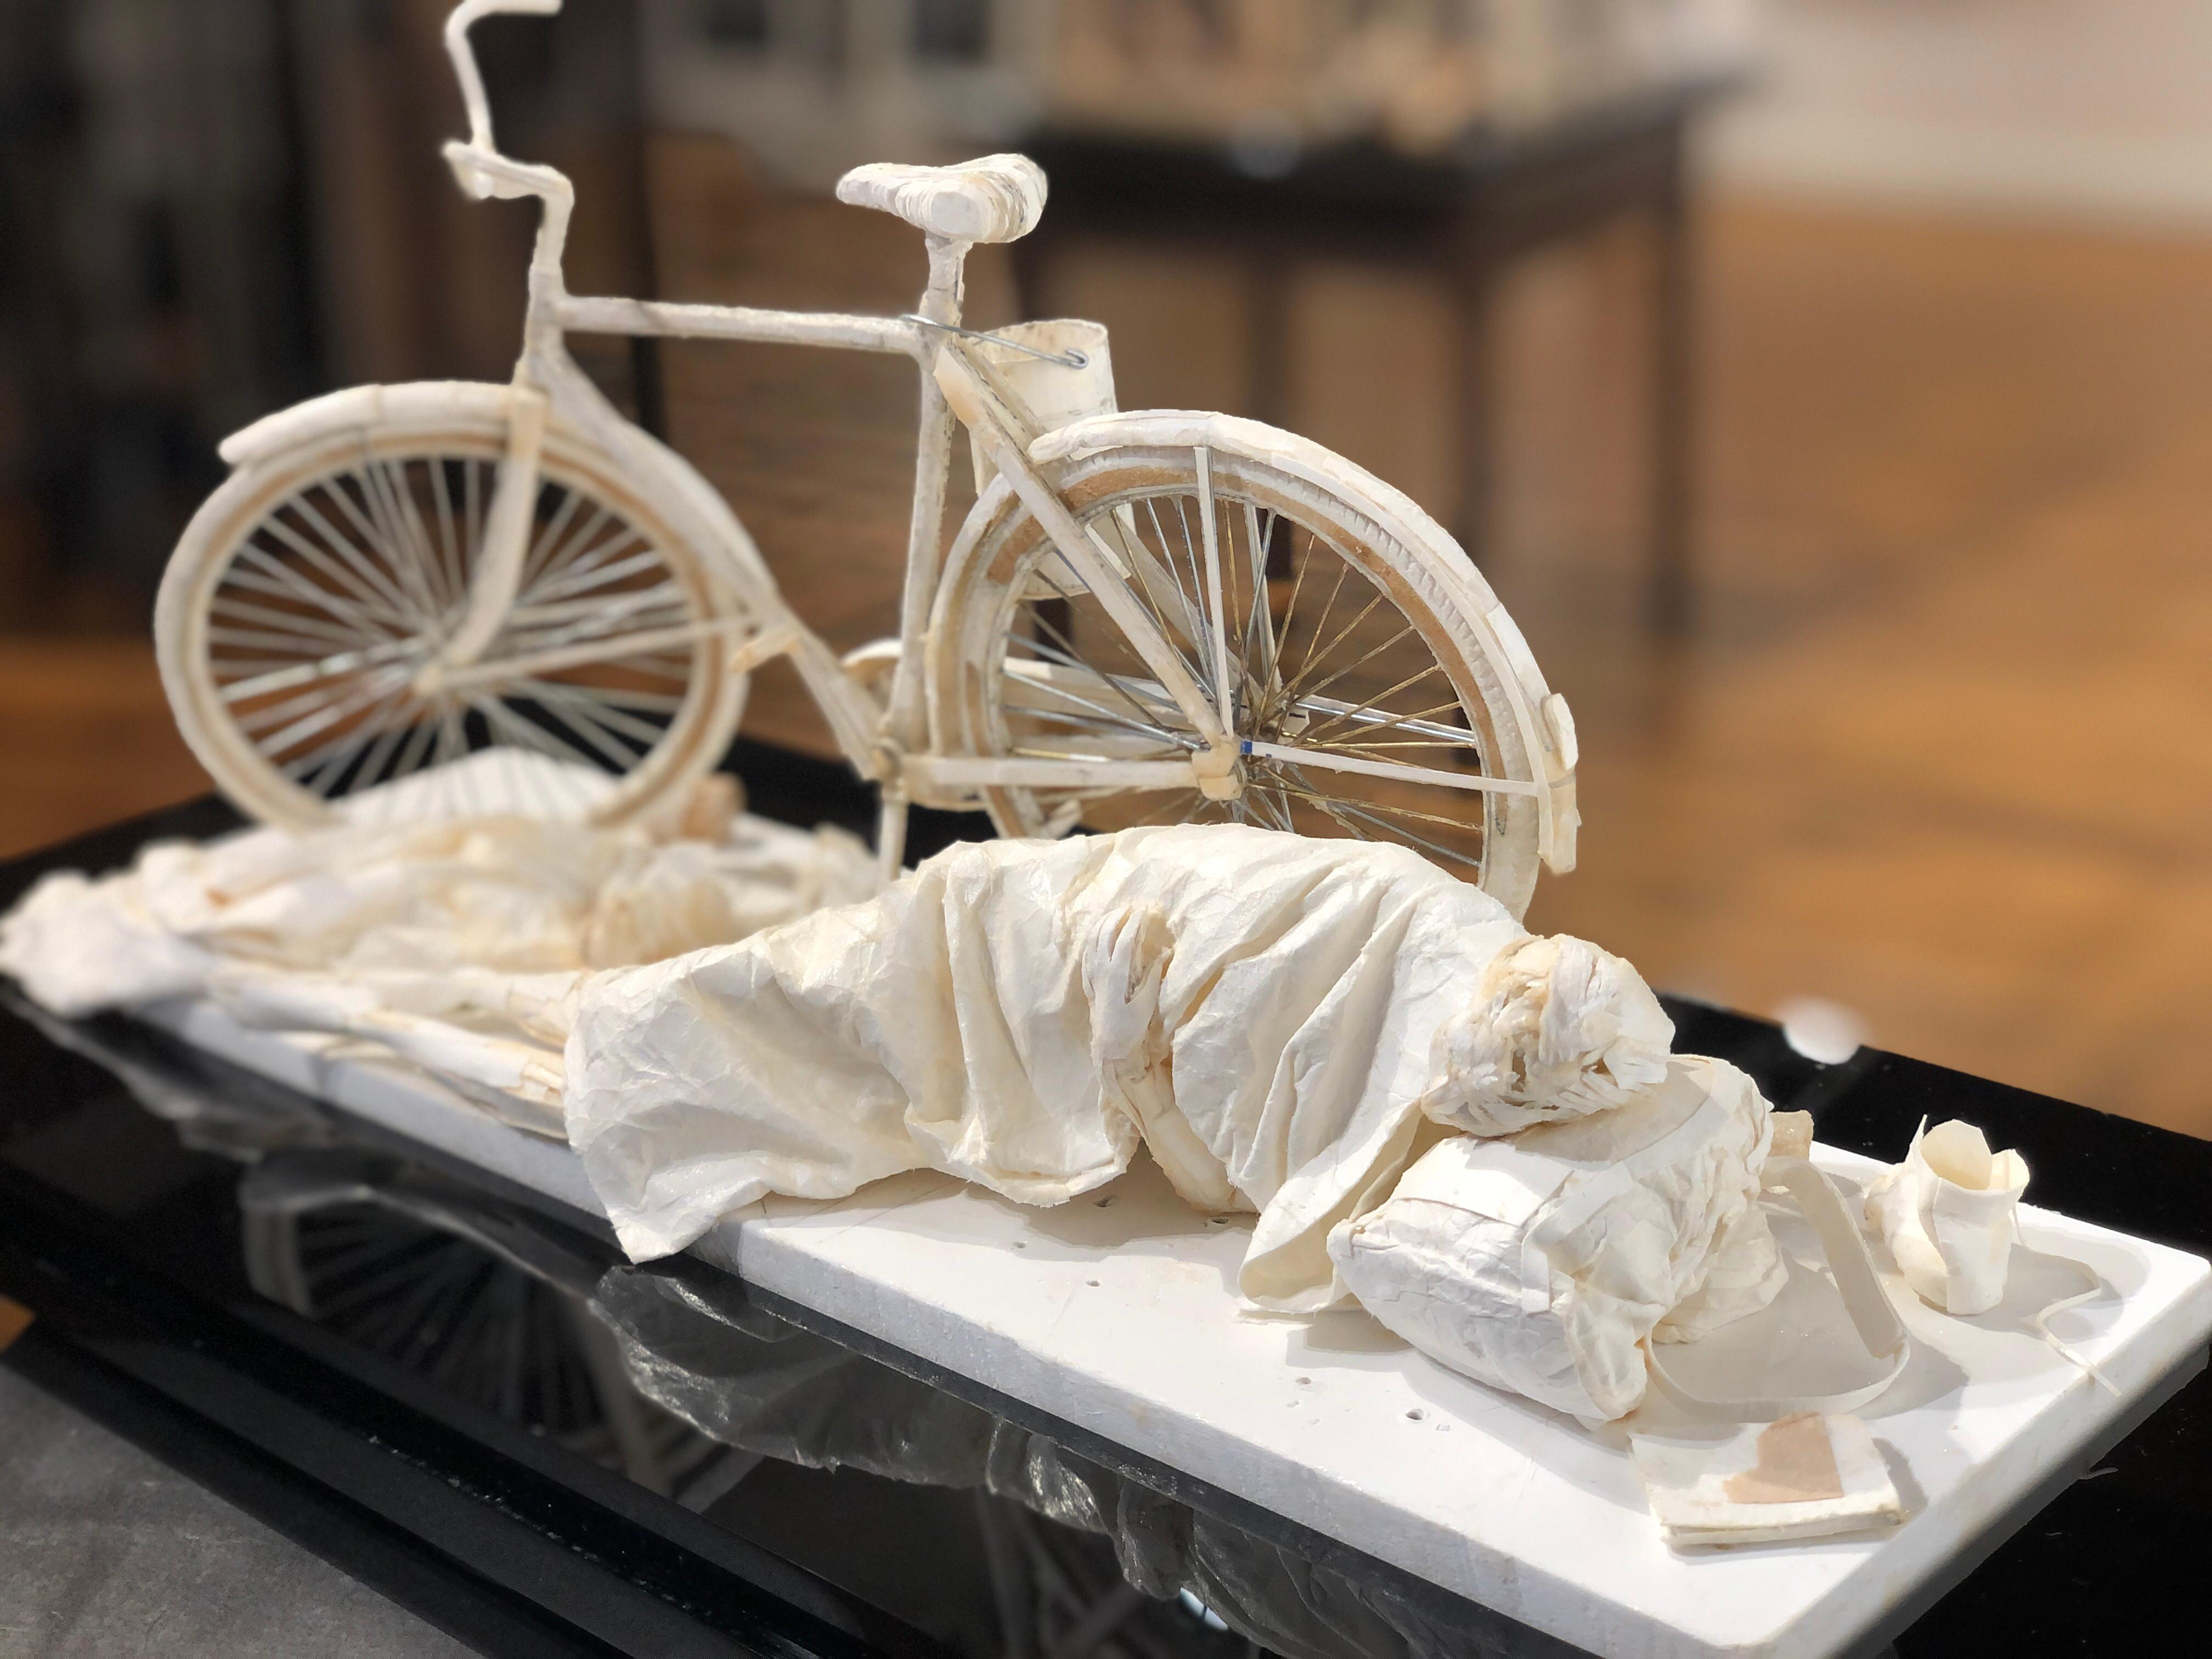 This realistic sculpture is created from scraps of paper and glue.  The sculpture is inspired by the characters found in cities around the world.  In this case, a figure sleeps beside a bicycle.  A backpack is used as a pillow and shoes has been